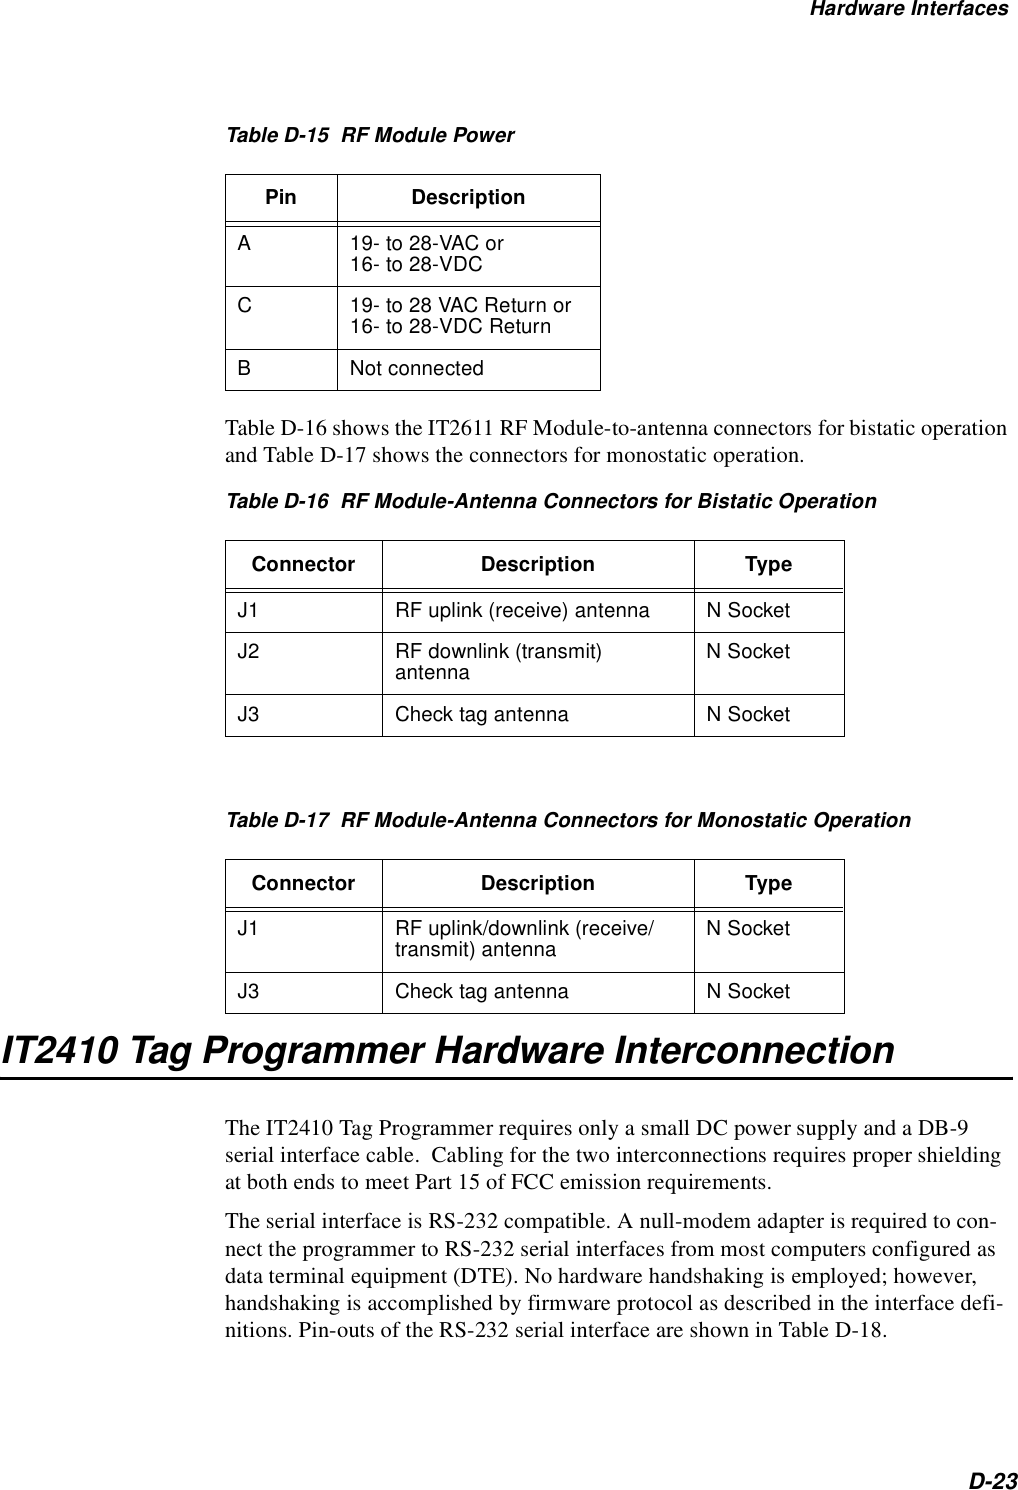 Hardware InterfacesD-23Table D-15  RF Module Power Table D-16 shows the IT2611 RF Module-to-antenna connectors for bistatic operation and Table D-17 shows the connectors for monostatic operation.IT2410 Tag Programmer Hardware InterconnectionThe IT2410 Tag Programmer requires only a small DC power supply and a DB-9 serial interface cable.  Cabling for the two interconnections requires proper shielding at both ends to meet Part 15 of FCC emission requirements.The serial interface is RS-232 compatible. A null-modem adapter is required to con-nect the programmer to RS-232 serial interfaces from most computers configured as data terminal equipment (DTE). No hardware handshaking is employed; however, handshaking is accomplished by firmware protocol as described in the interface defi-nitions. Pin-outs of the RS-232 serial interface are shown in Table D-18.Pin DescriptionA 19- to 28-VAC or16- to 28-VDCC 19- to 28 VAC Return or16- to 28-VDC ReturnB Not connectedTable D-16  RF Module-Antenna Connectors for Bistatic OperationConnector Description TypeJ1 RF uplink (receive) antenna N SocketJ2 RF downlink (transmit) antenna N SocketJ3 Check tag antenna N SocketTable D-17  RF Module-Antenna Connectors for Monostatic OperationConnector Description TypeJ1 RF uplink/downlink (receive/transmit) antenna N SocketJ3 Check tag antenna N Socket